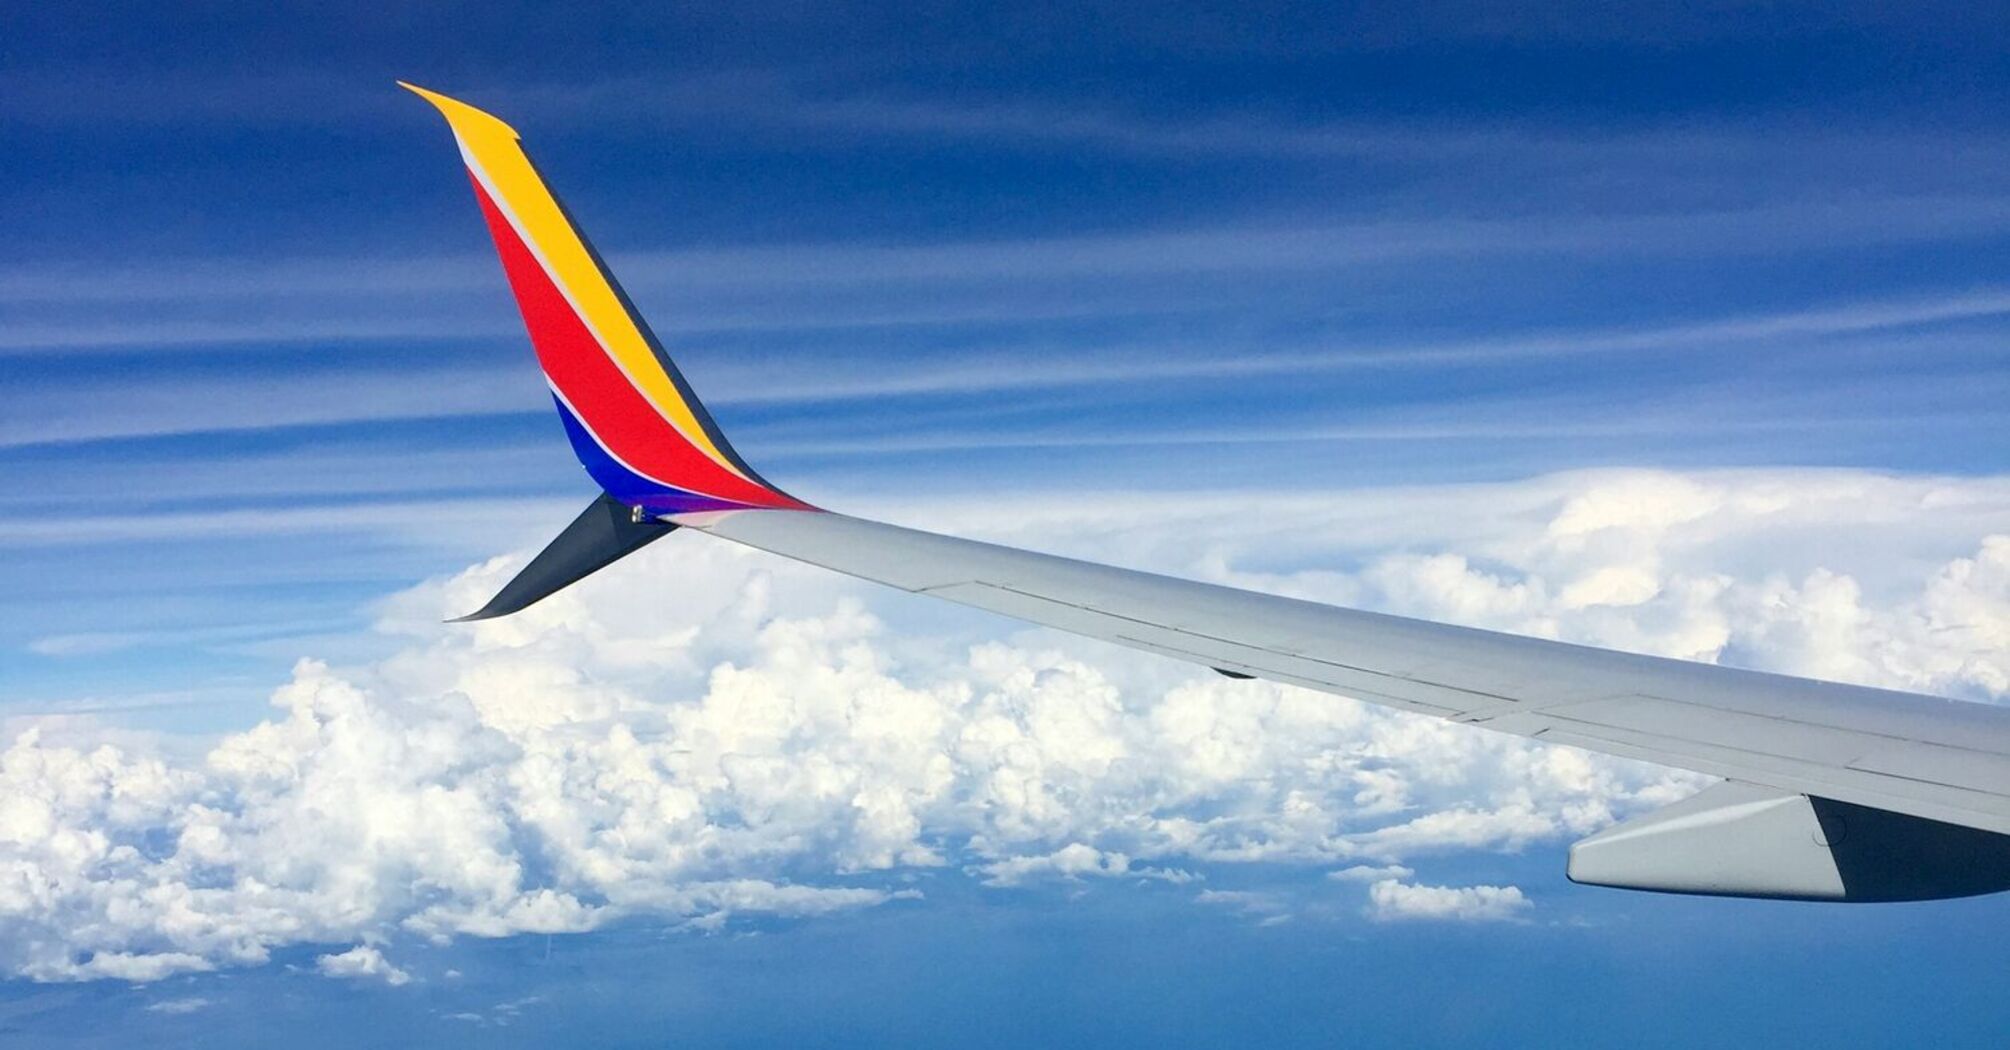 View from a plane window showing the wing of a Southwest Airlines